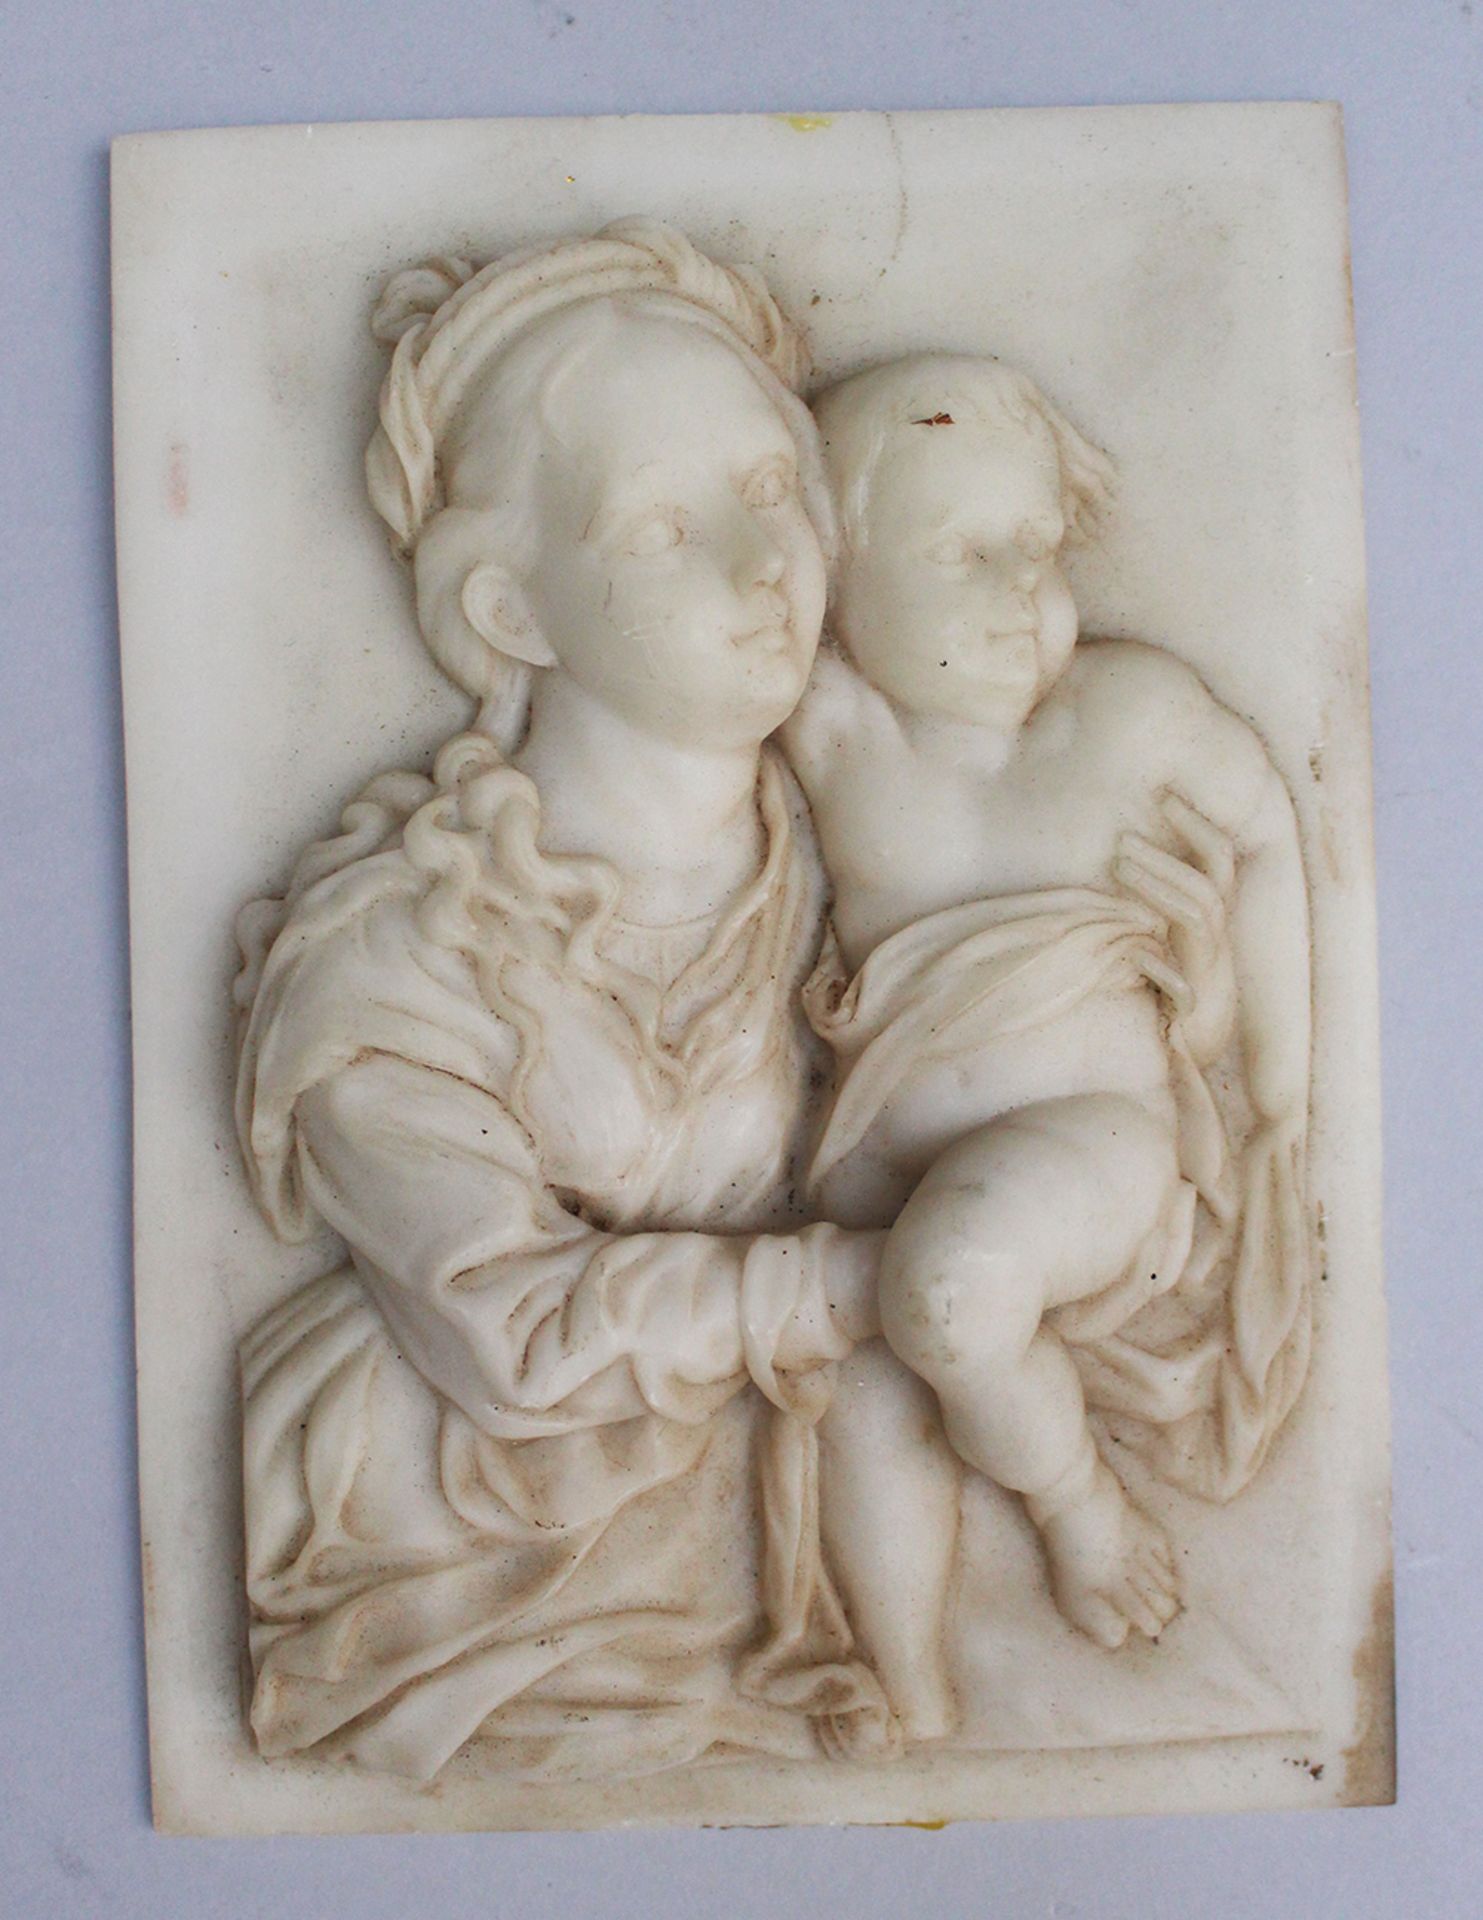 Plaquette with Maria and child in folded cloth, on rectangular plinth, 18x13cm.